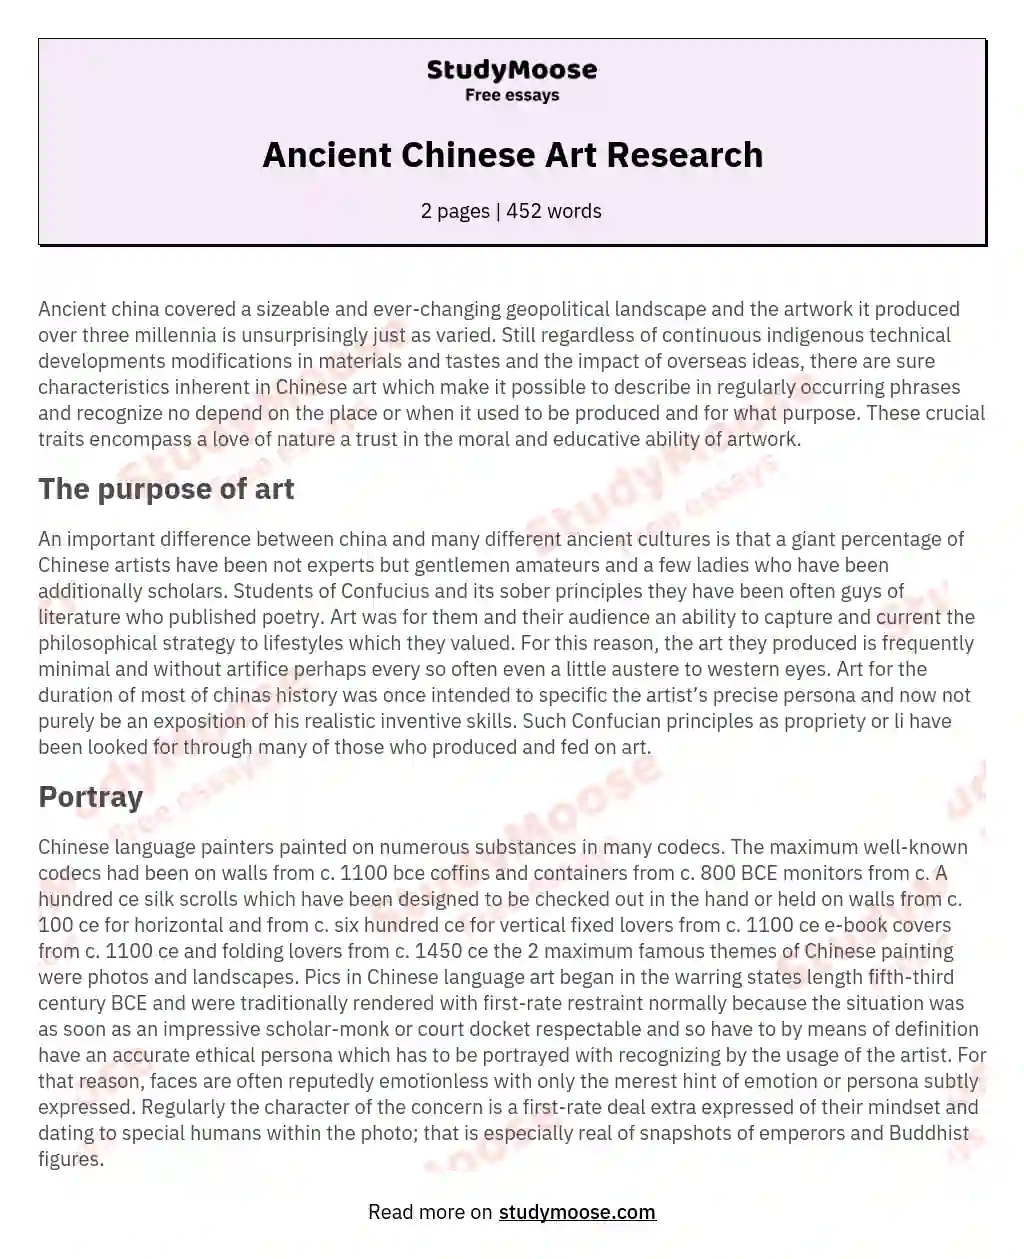 Ancient Chinese Art Research essay